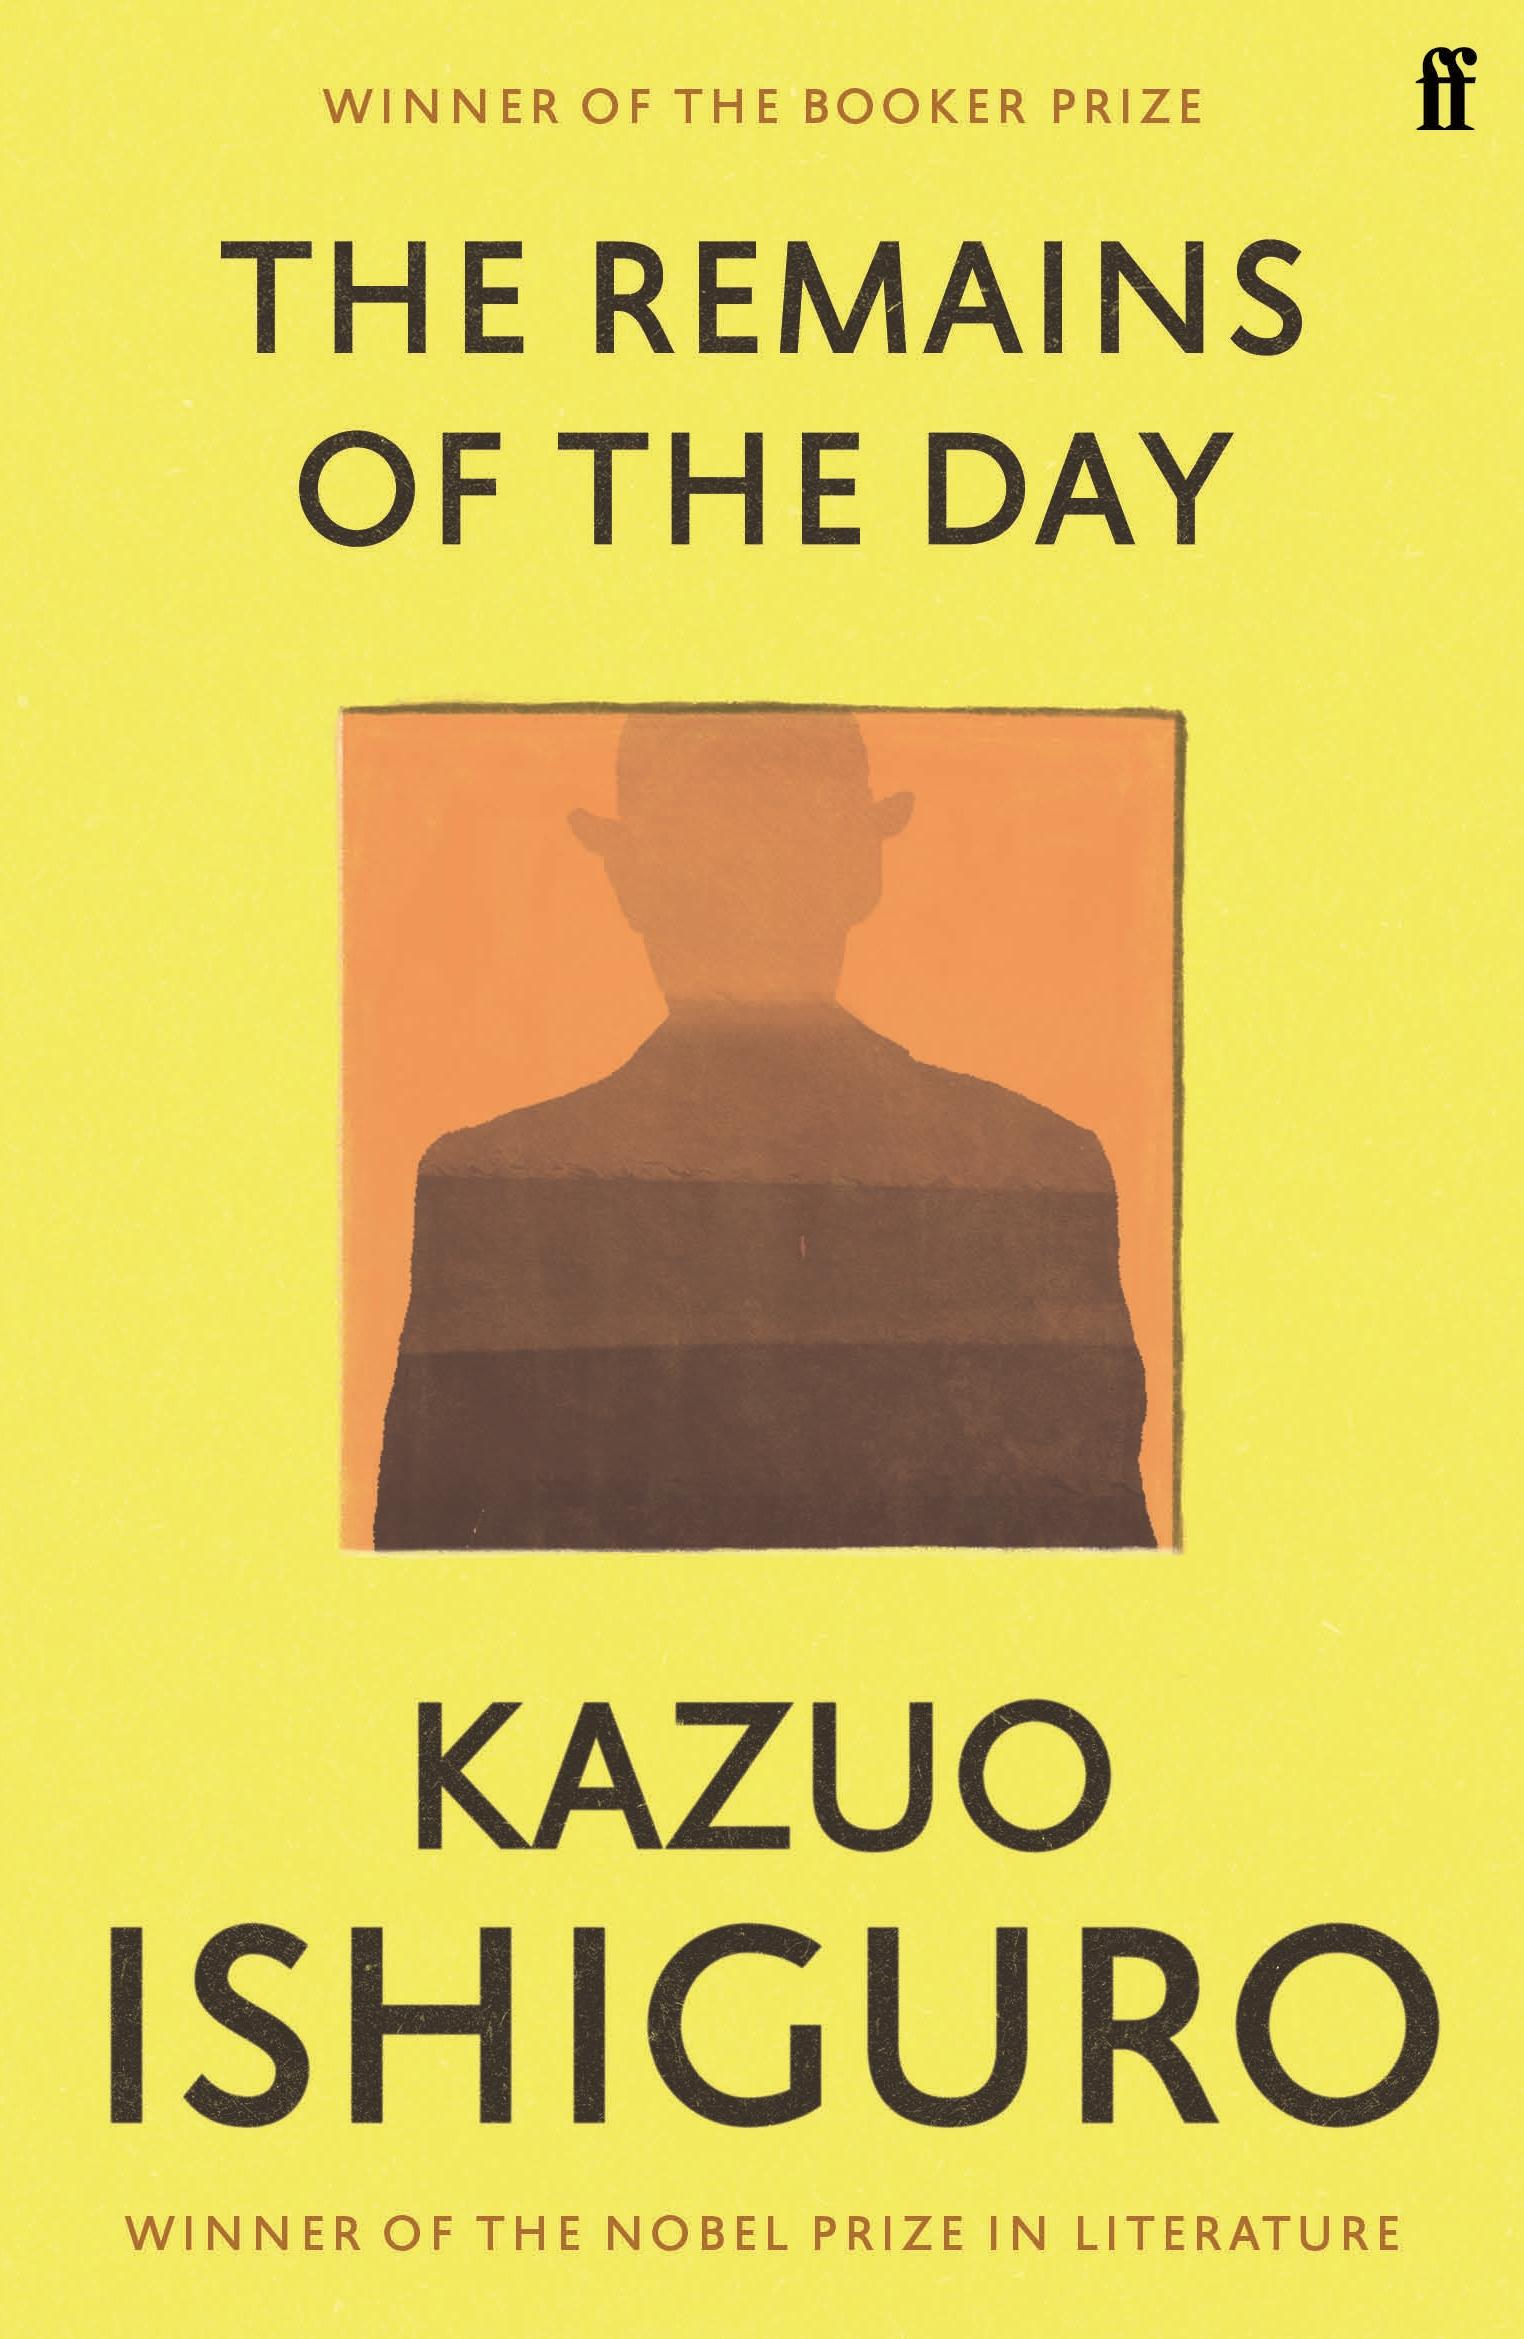 The Remains of the Day | Kazuo Ishiguro | Taschenbuch | 258 S. | Englisch | 2010 | Faber And Faber Ltd. | EAN 9780571258246 - Ishiguro, Kazuo